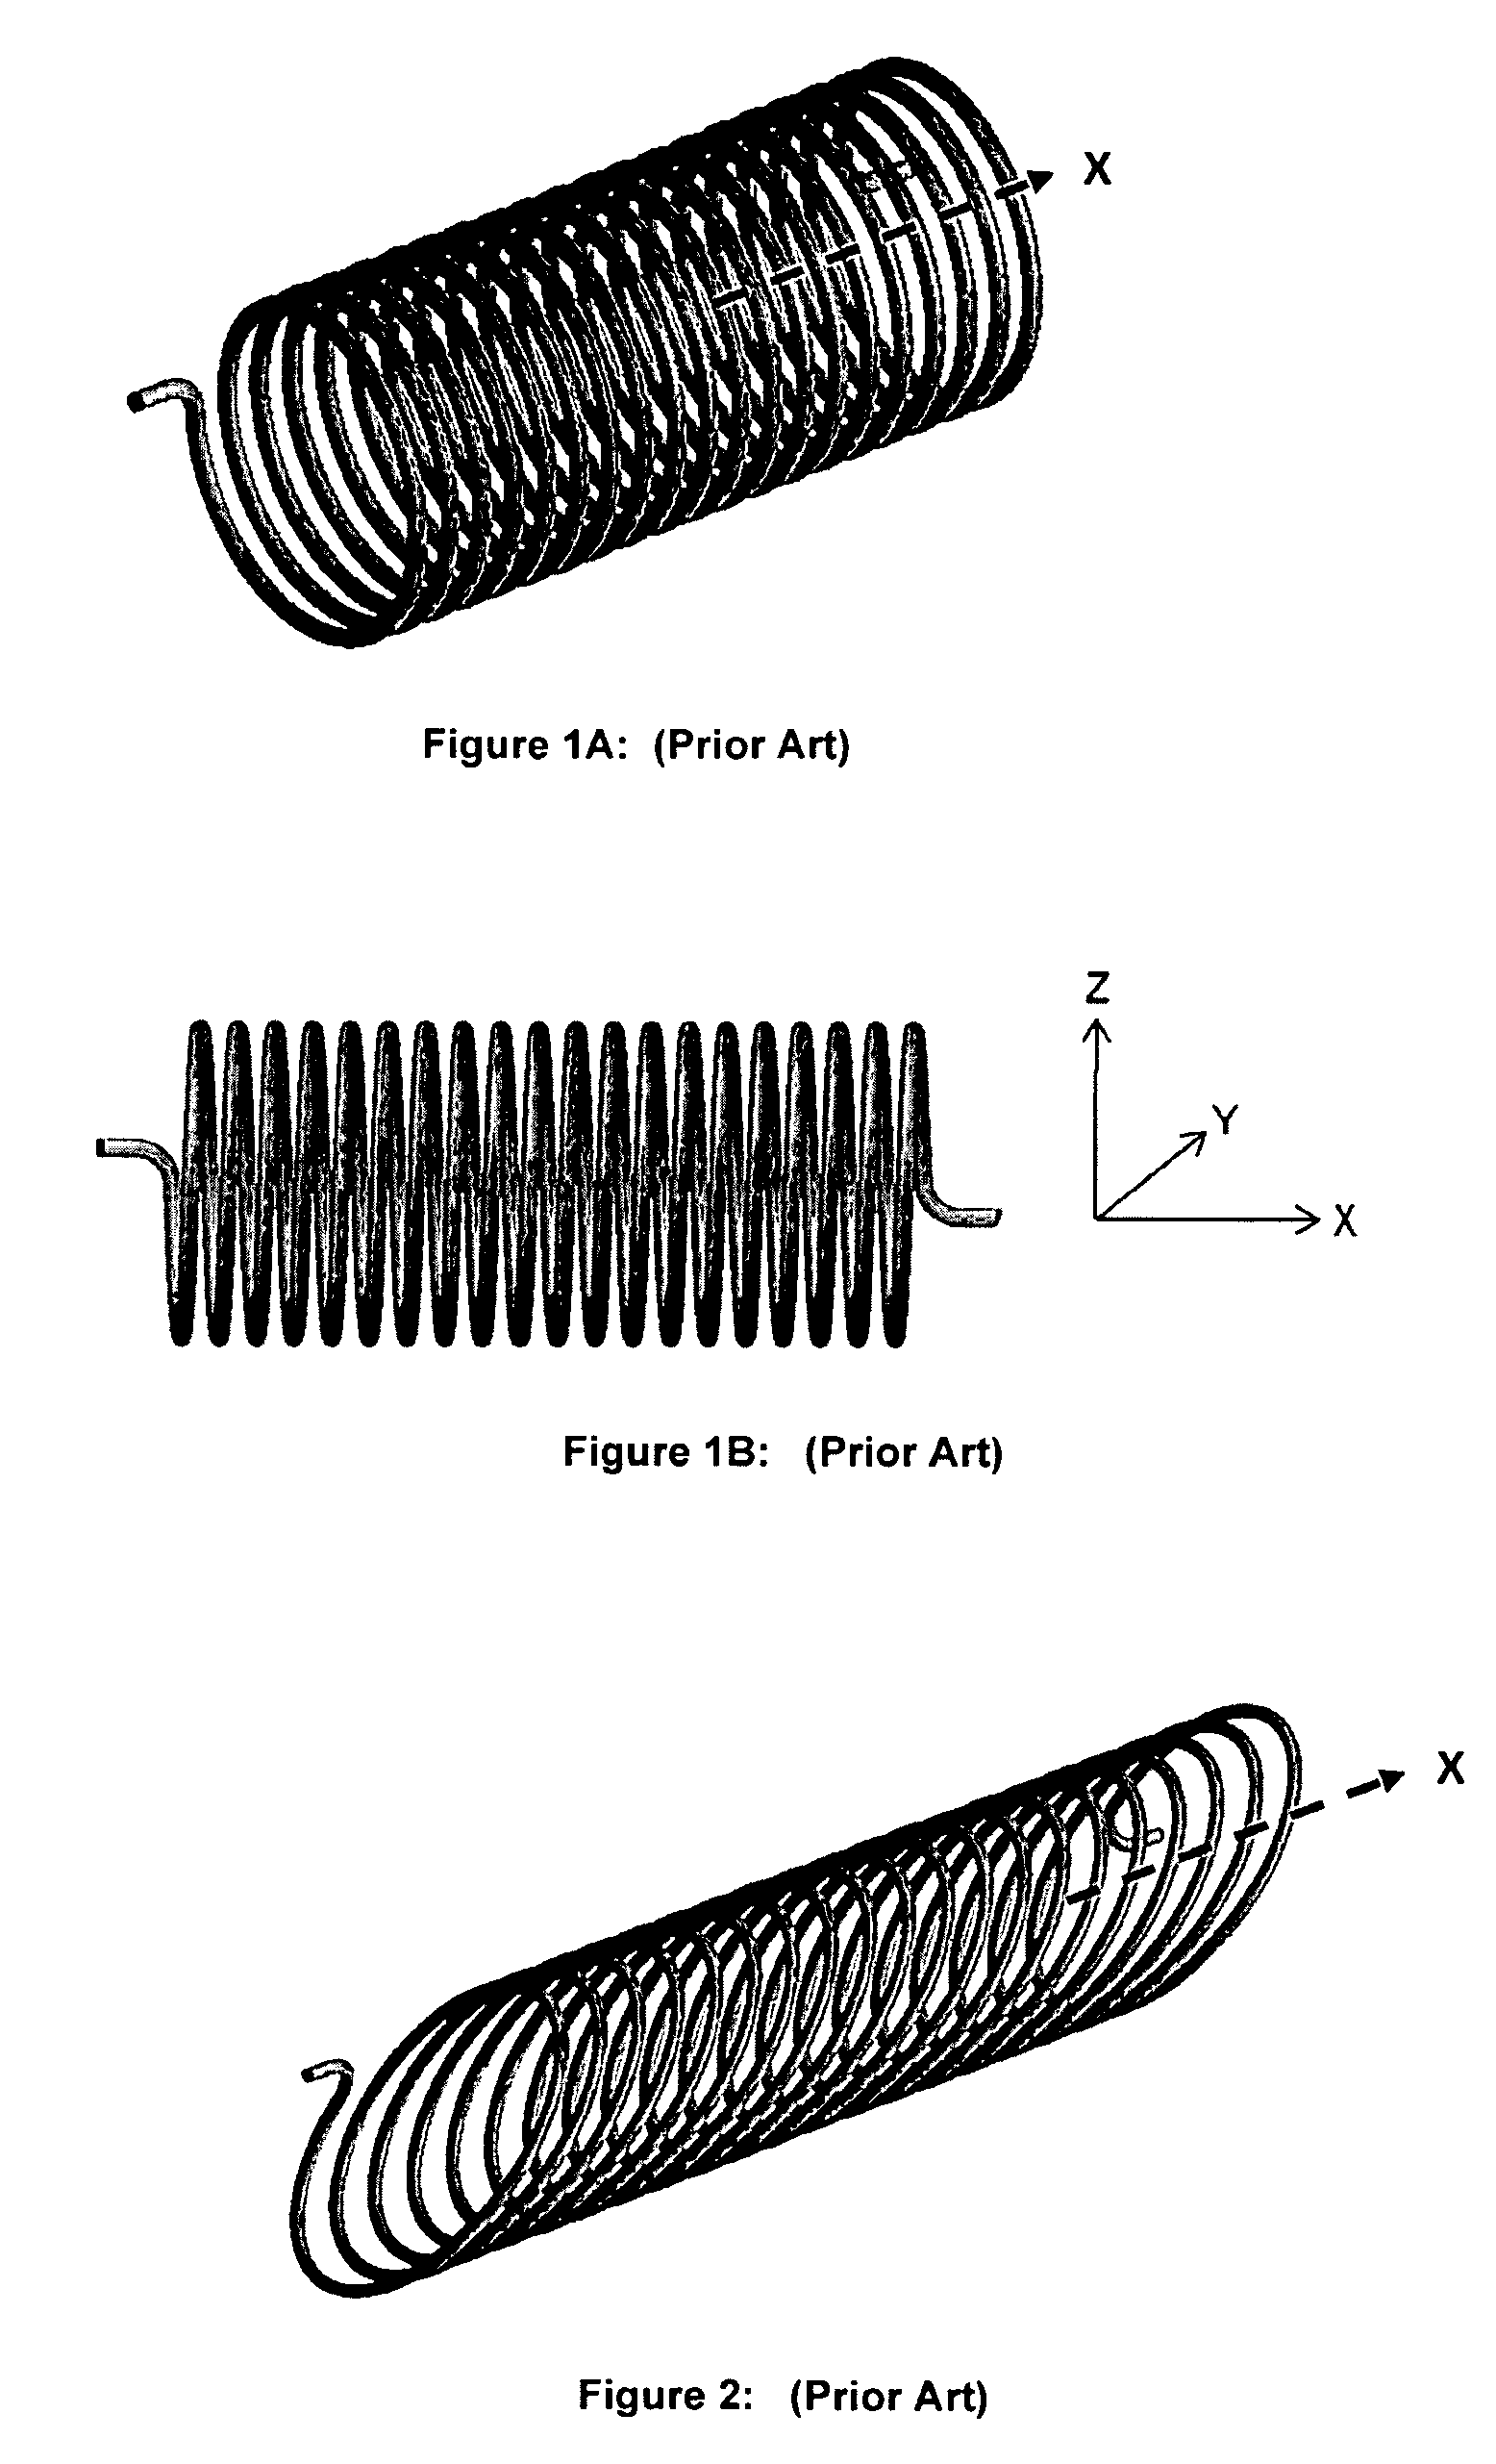 Conductor Assembly and Methods of Fabricating a Conductor Assembly With Coil Having An Arcate Shape Along A Curved Axis